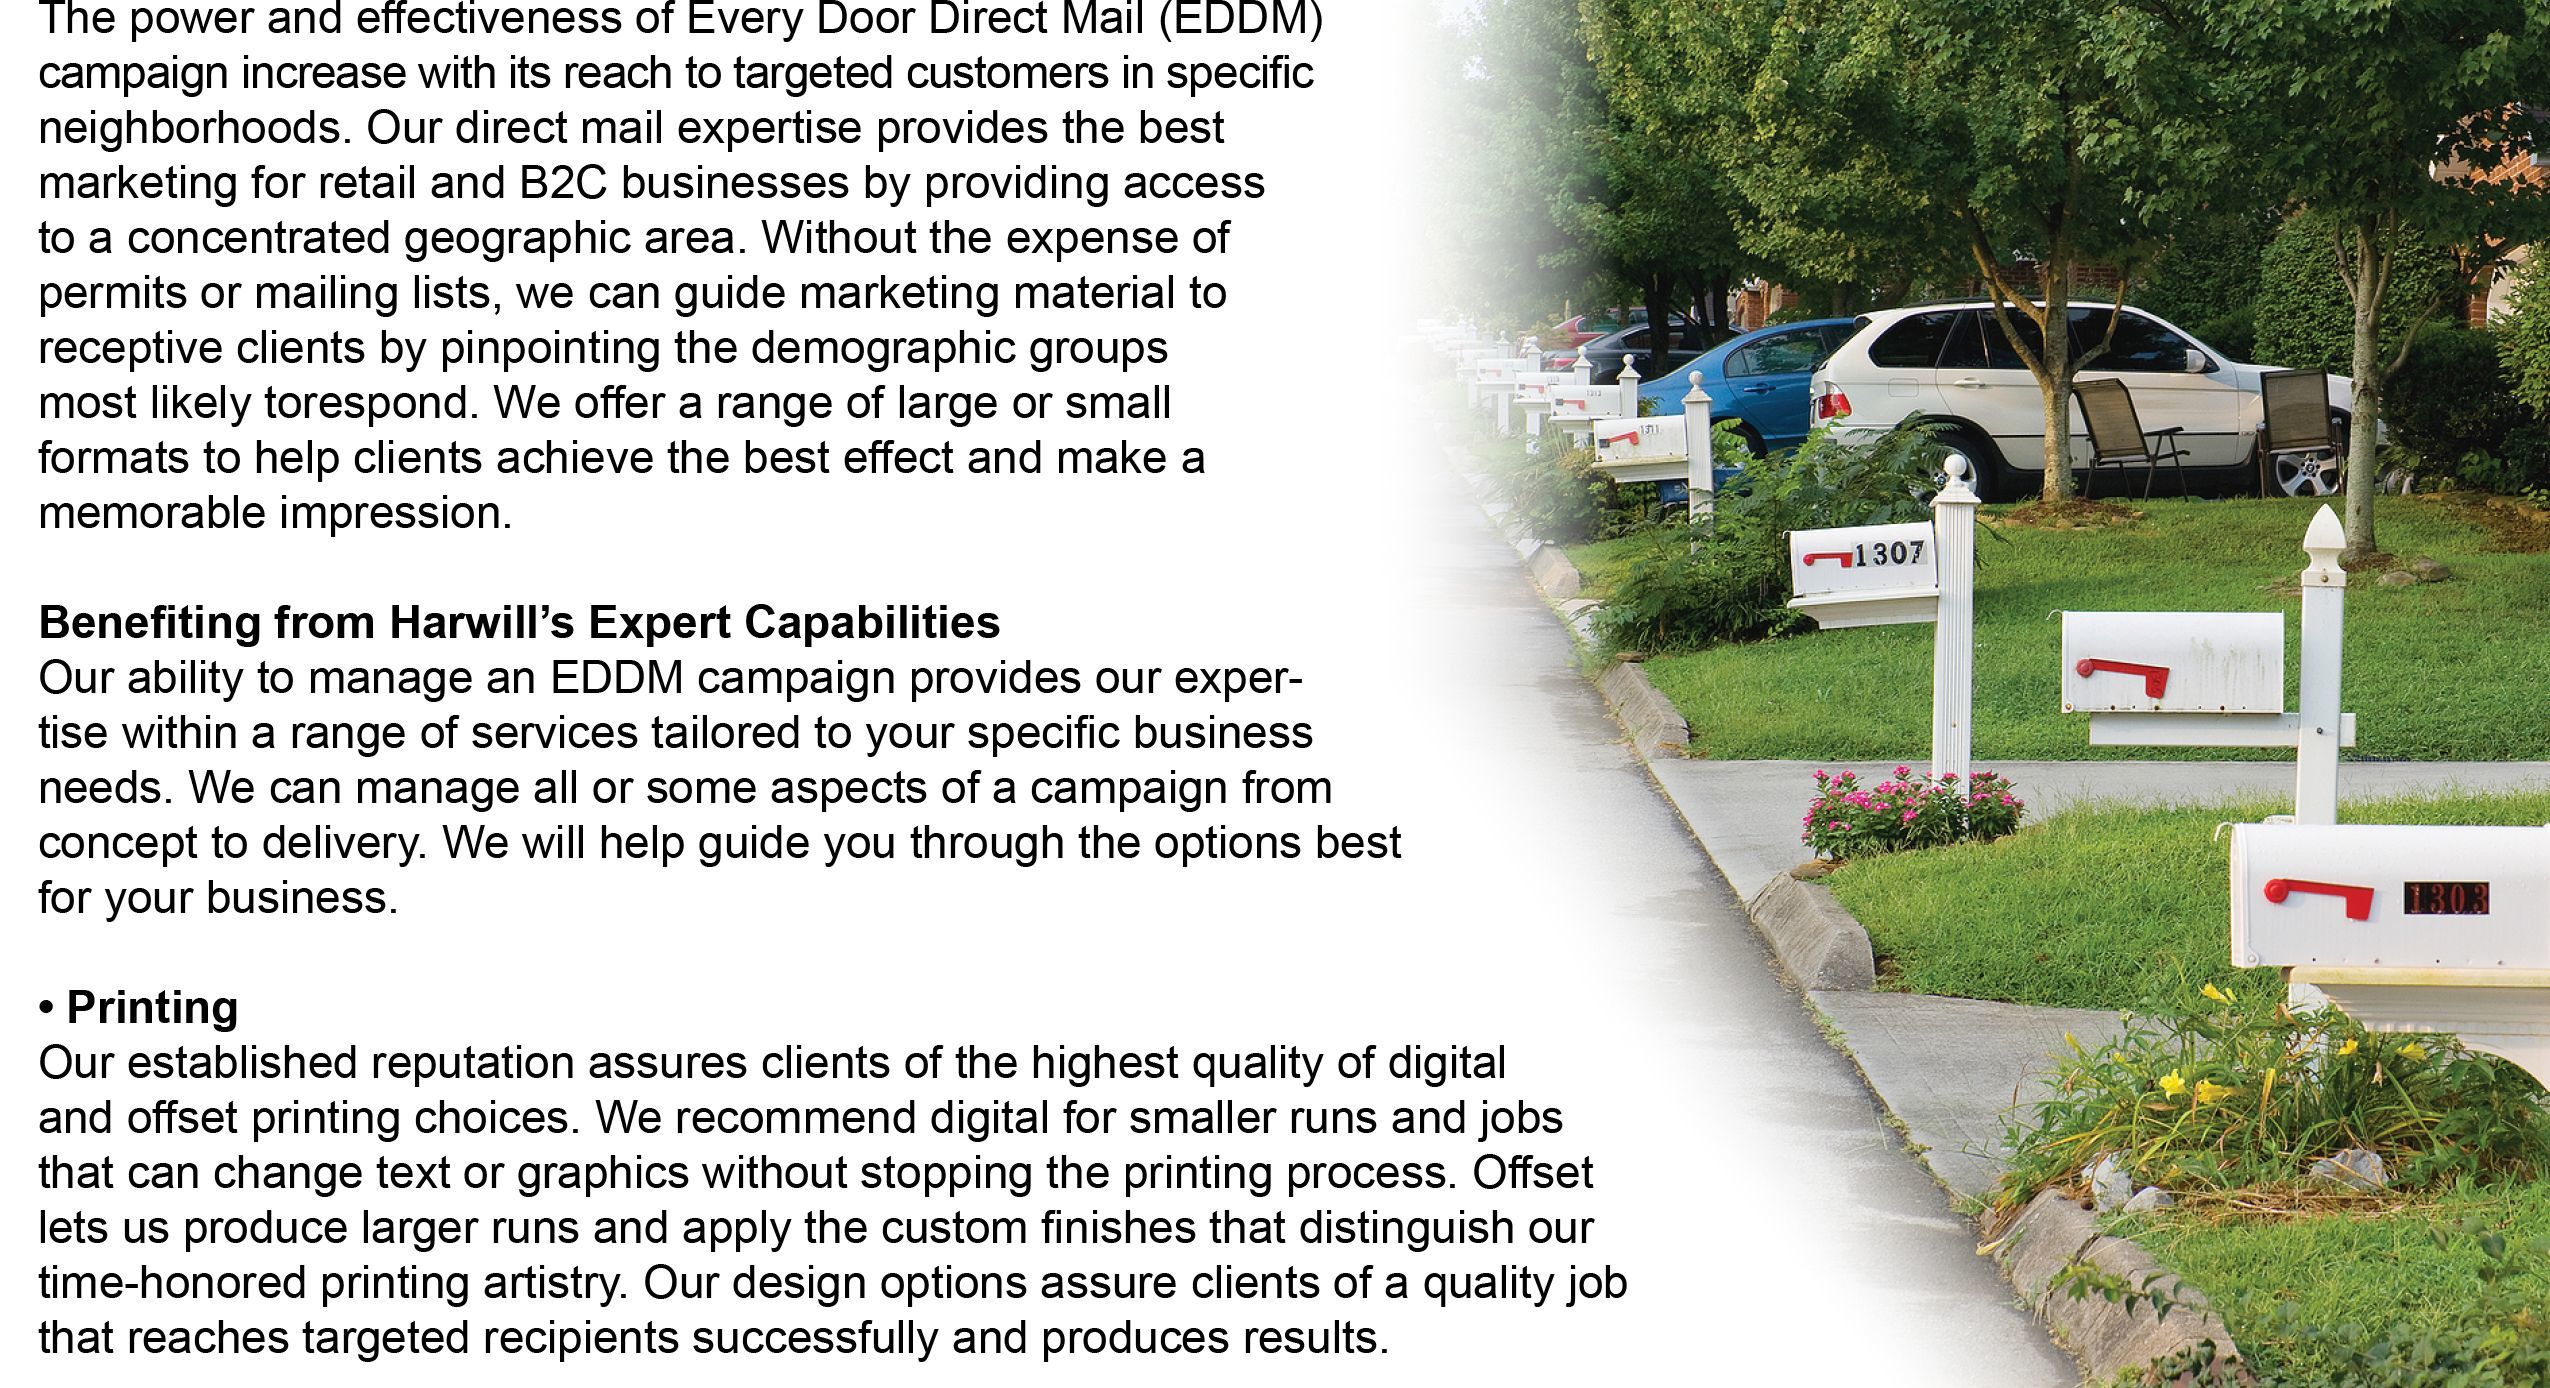 EDDM Every Door Direct Mail a great way to get your message in your local neighbors’ mailbox!